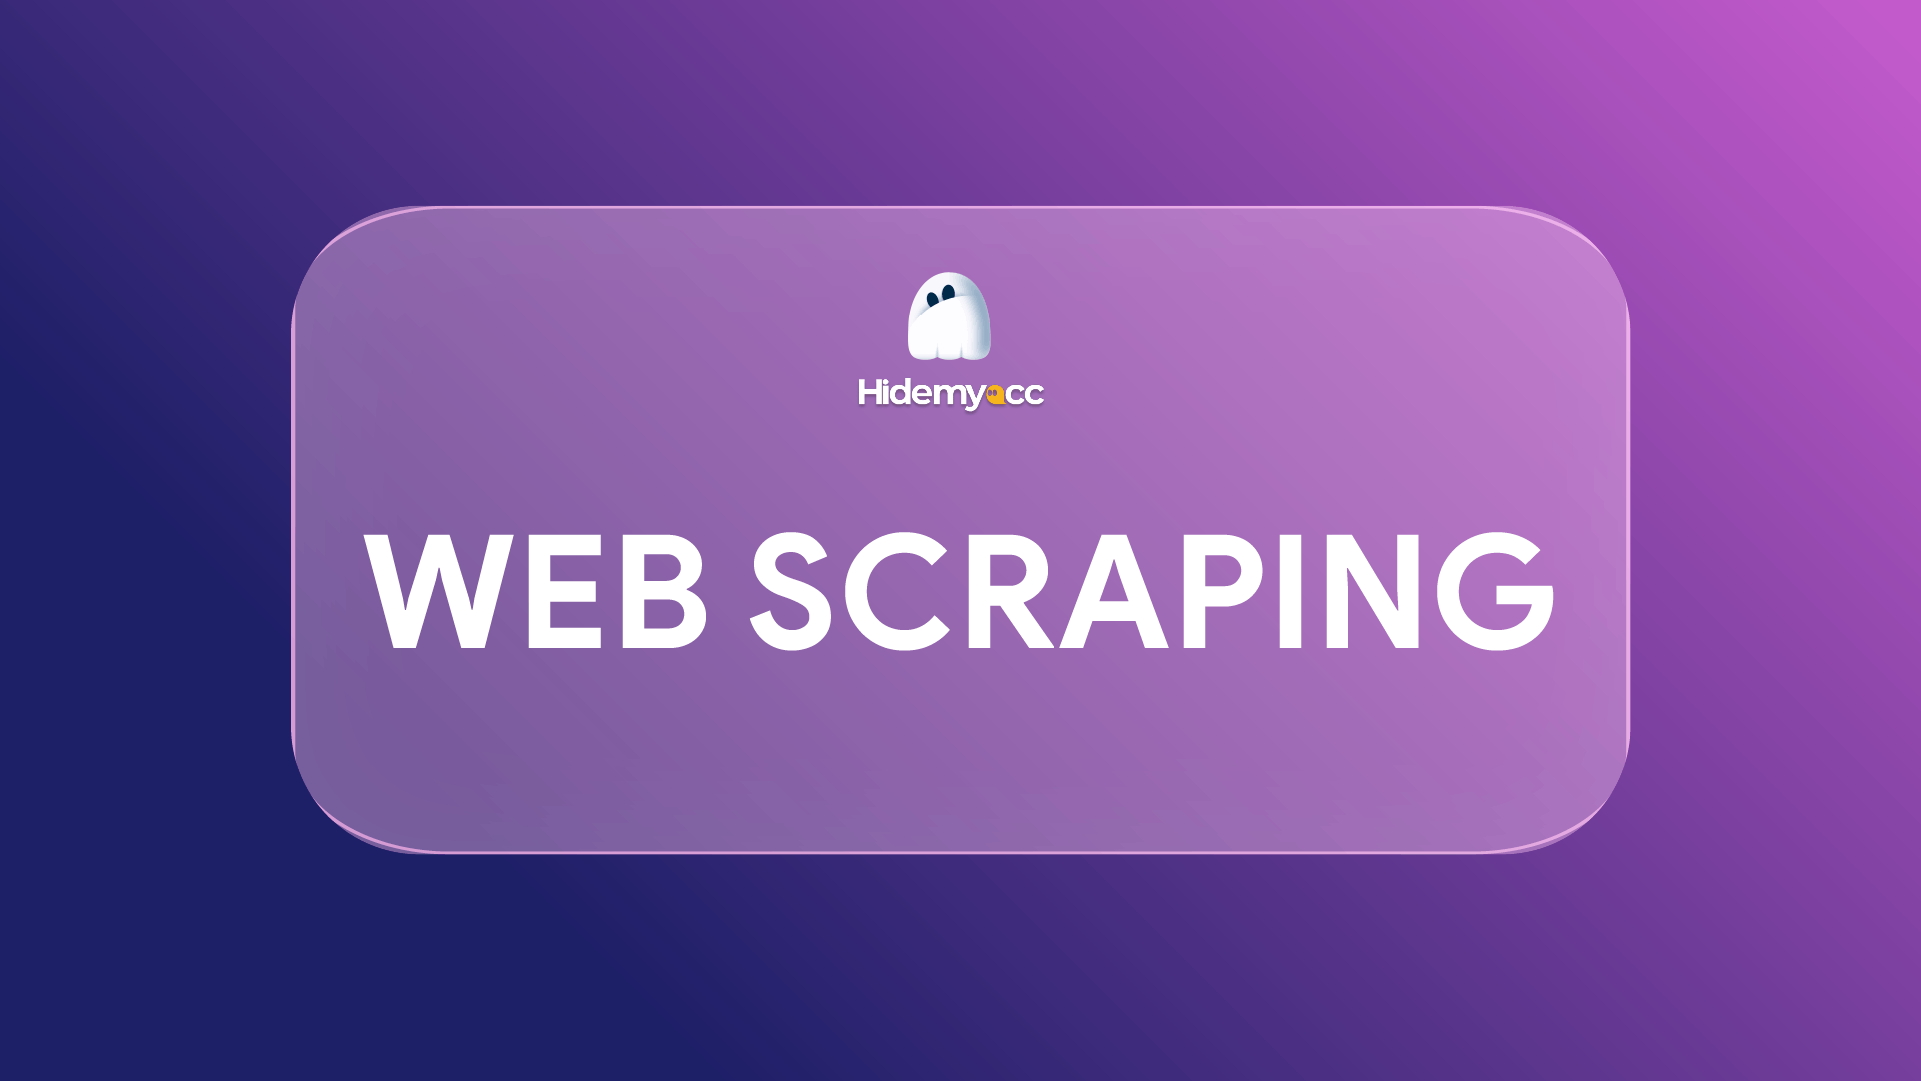 Hidemyacc: Your Go-To Tool for Anonymous Web Scraping